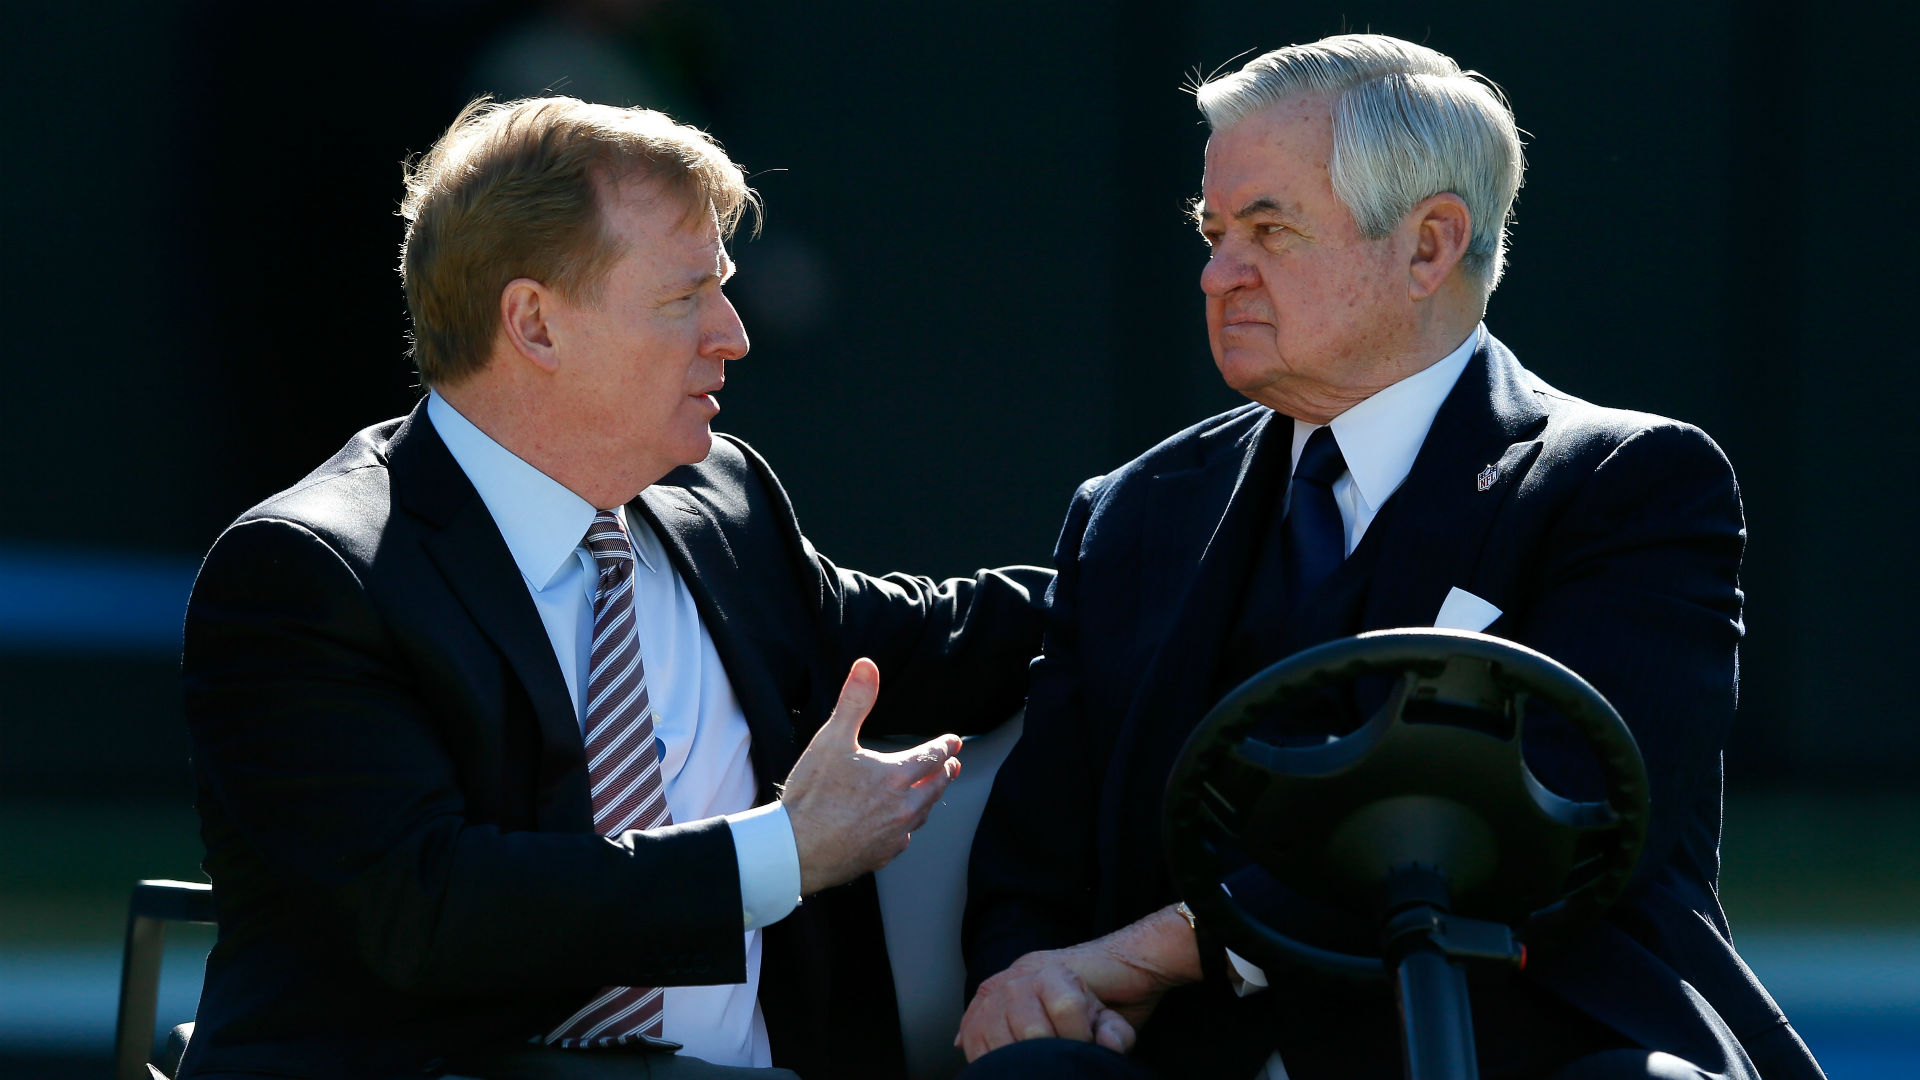 Don't count on NFL to give Jerry Richardson full Donald Sterling treatment